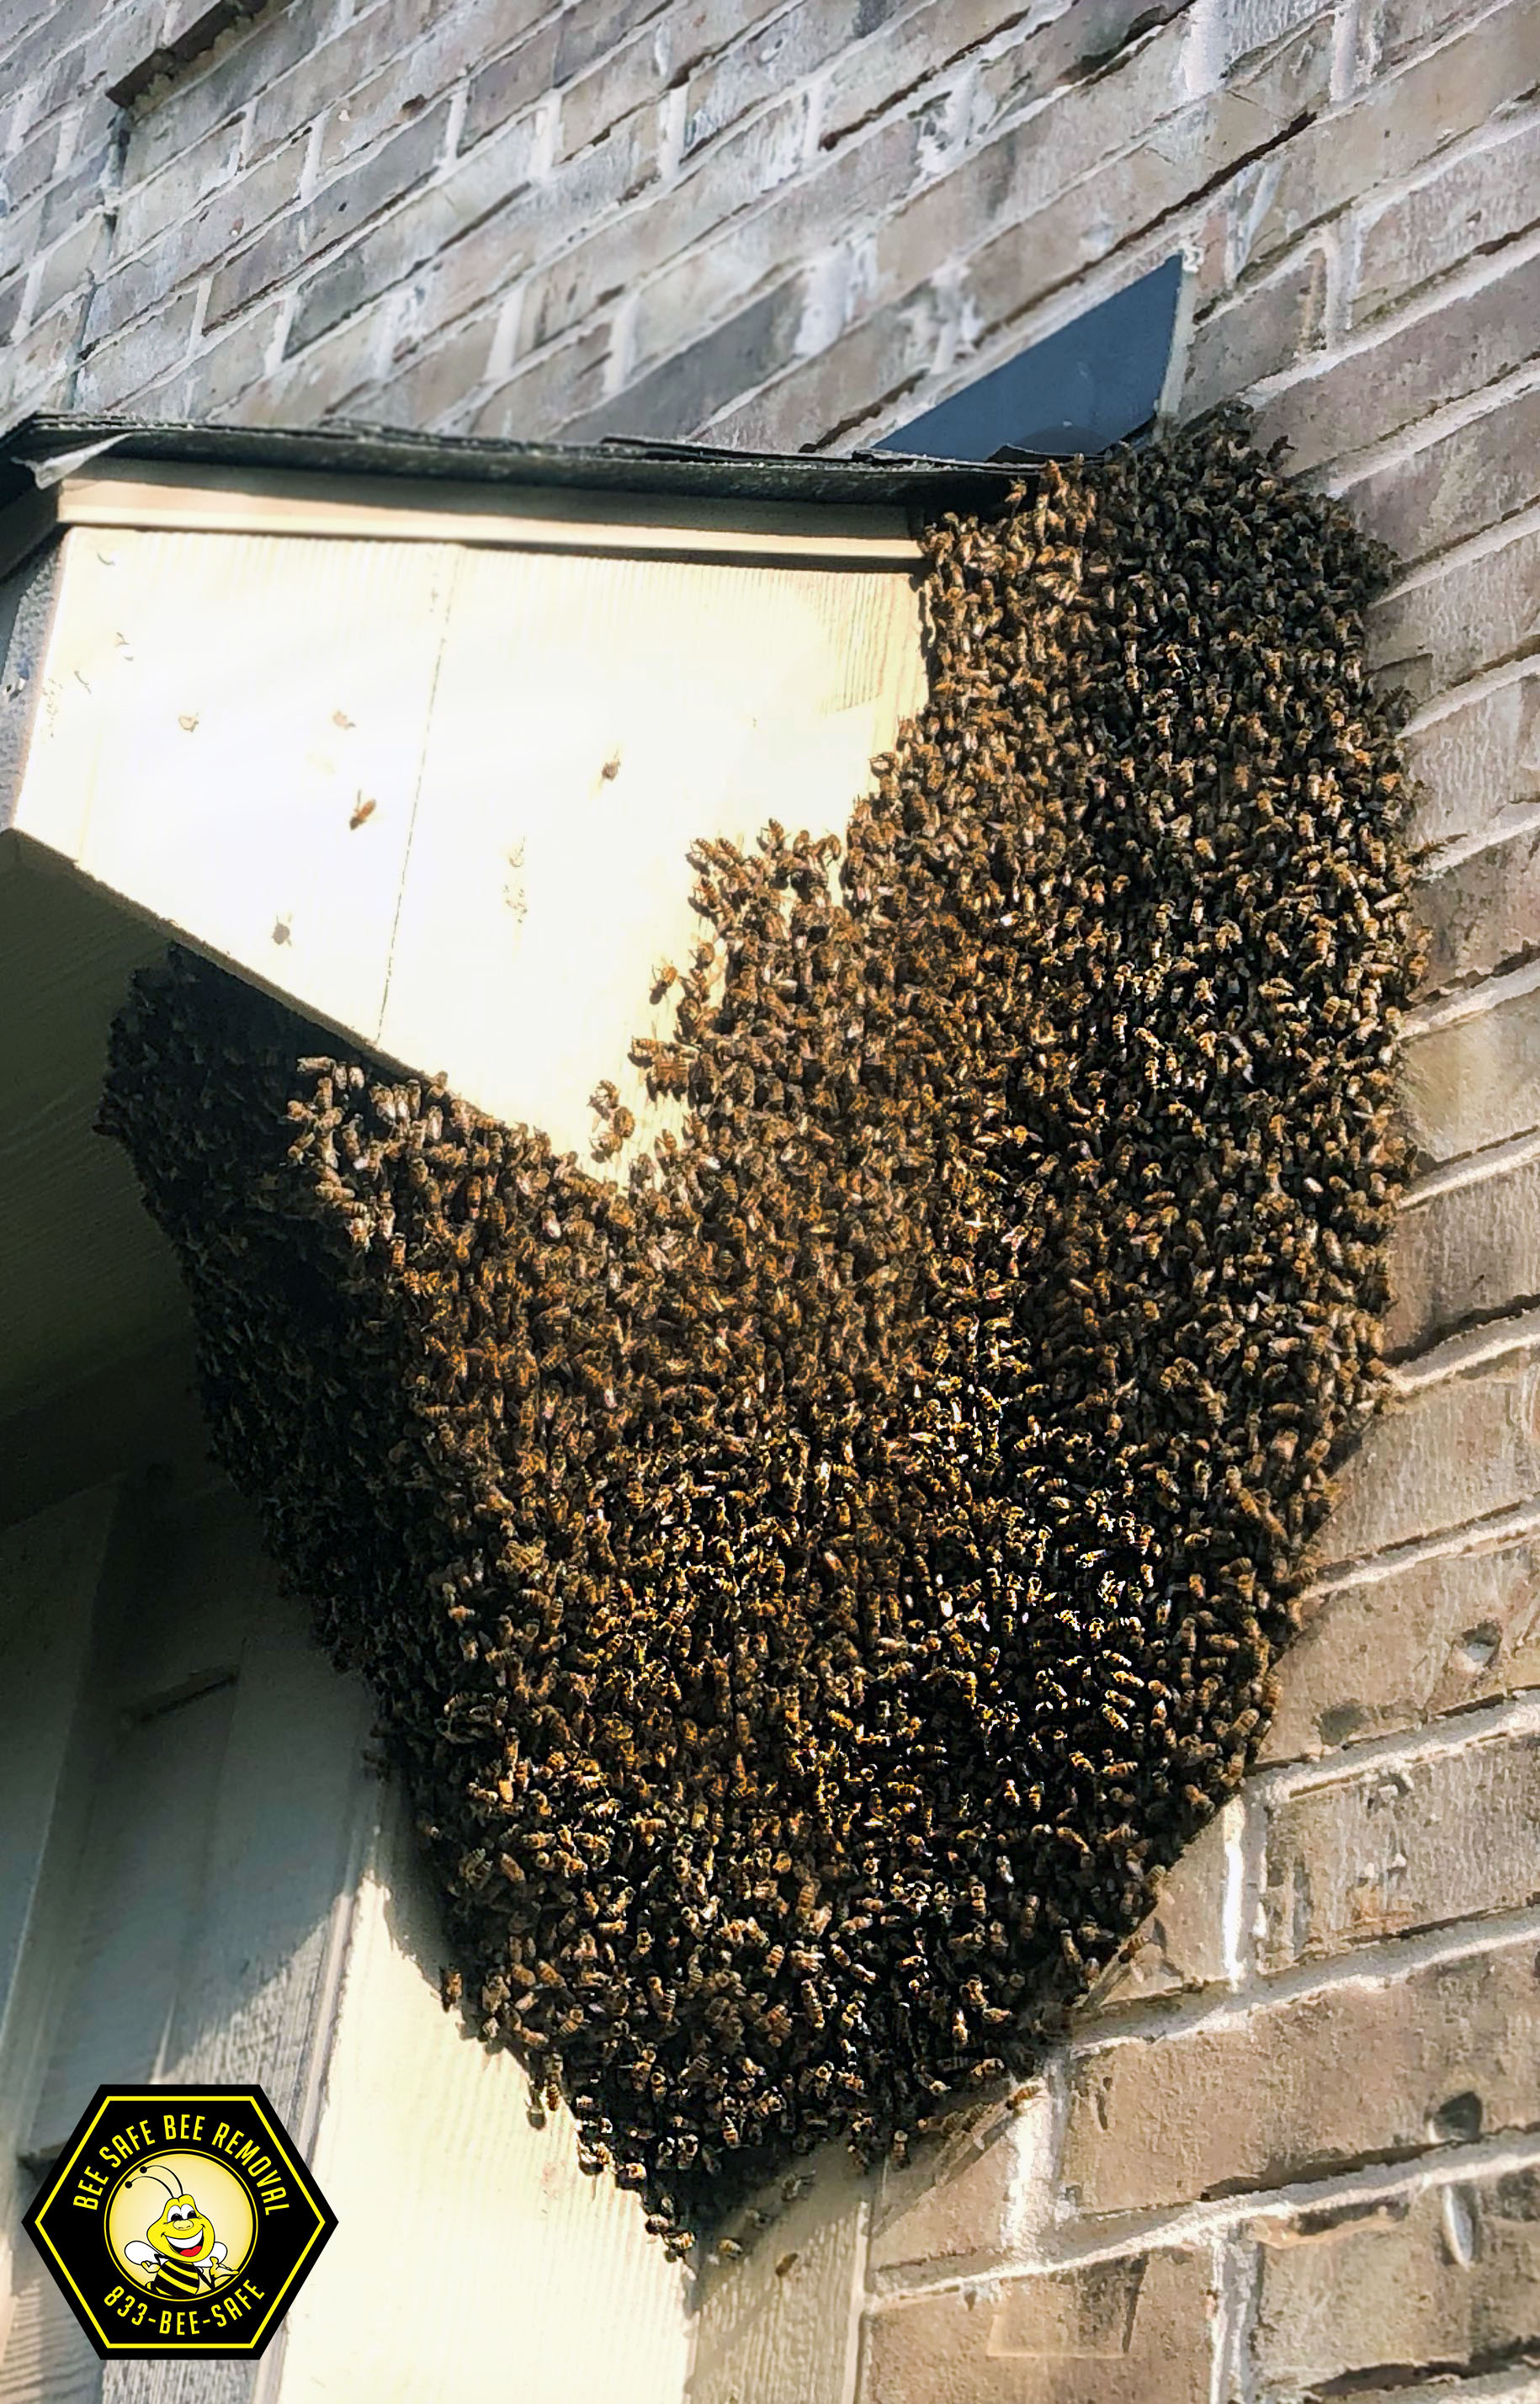 Bees and Wasps on a Soffit in Frisco